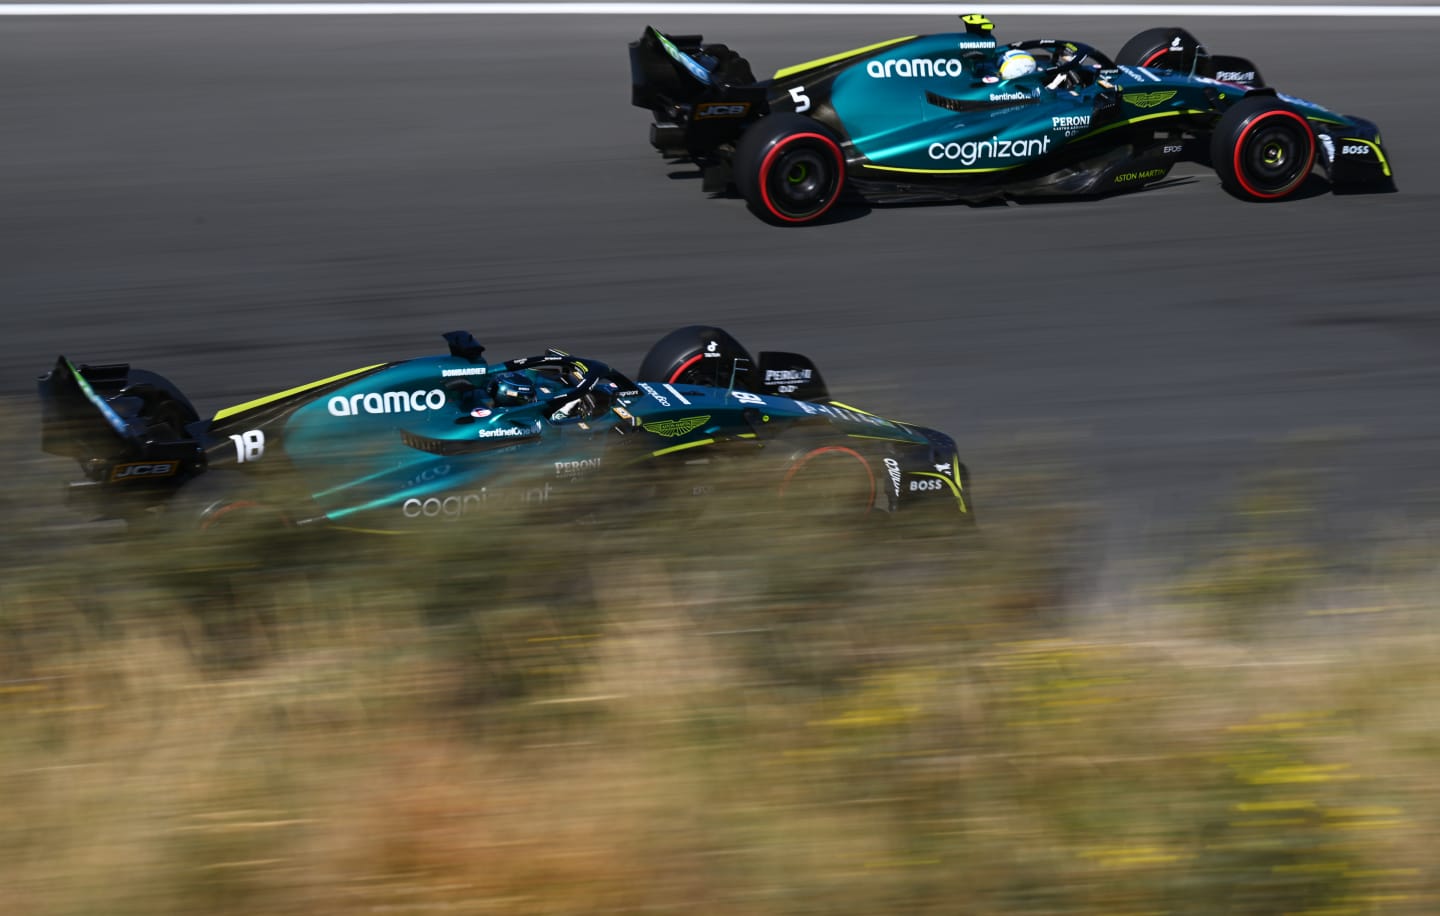 ZANDVOORT, NETHERLANDS - SEPTEMBER 03: Sebastian Vettel of Germany driving the (5) Aston Martin AMR22 Mercedes and Lance Stroll of Canada driving the (18) Aston Martin AMR22 Mercedes on track during final practice ahead of the F1 Grand Prix of The Netherlands at Circuit Zandvoort on September 03, 2022 in Zandvoort, Netherlands. (Photo by Clive Mason/Getty Images)